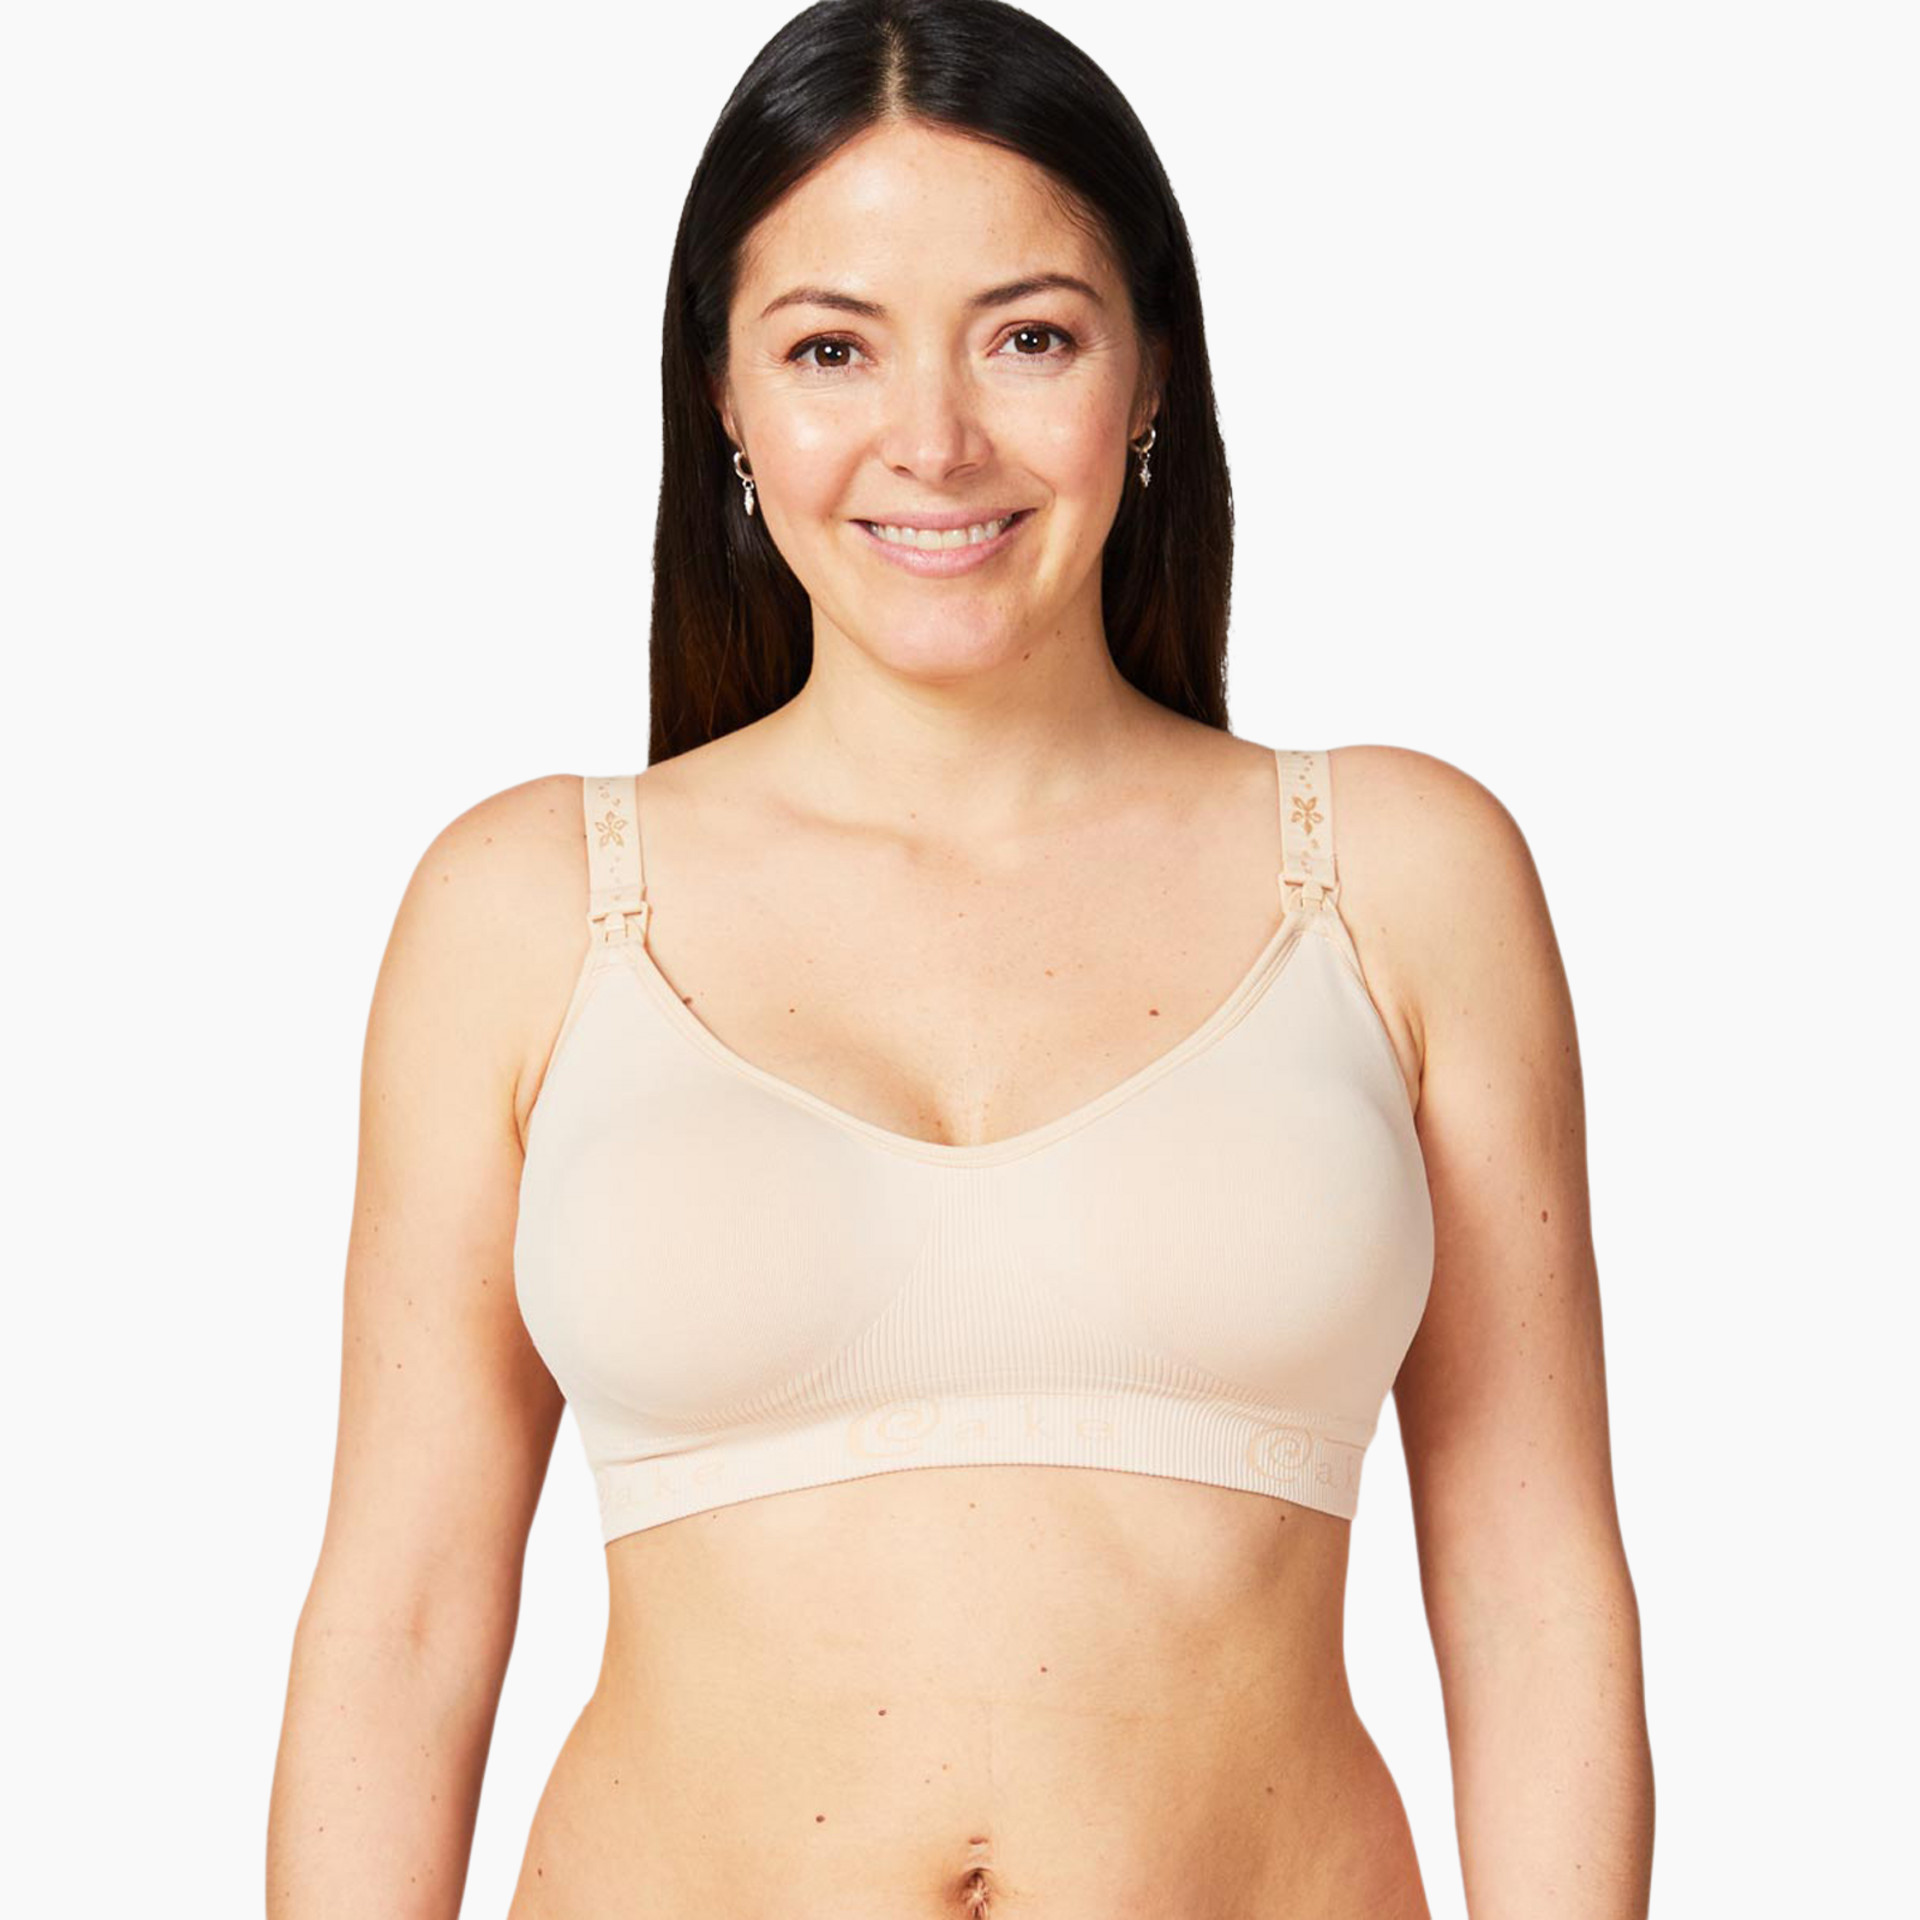 Cake Maternity Women's Maternity and Nursing Rock Candy Luxury Seamless  Contour Bra (with removable pads), Choc Brown, Small 